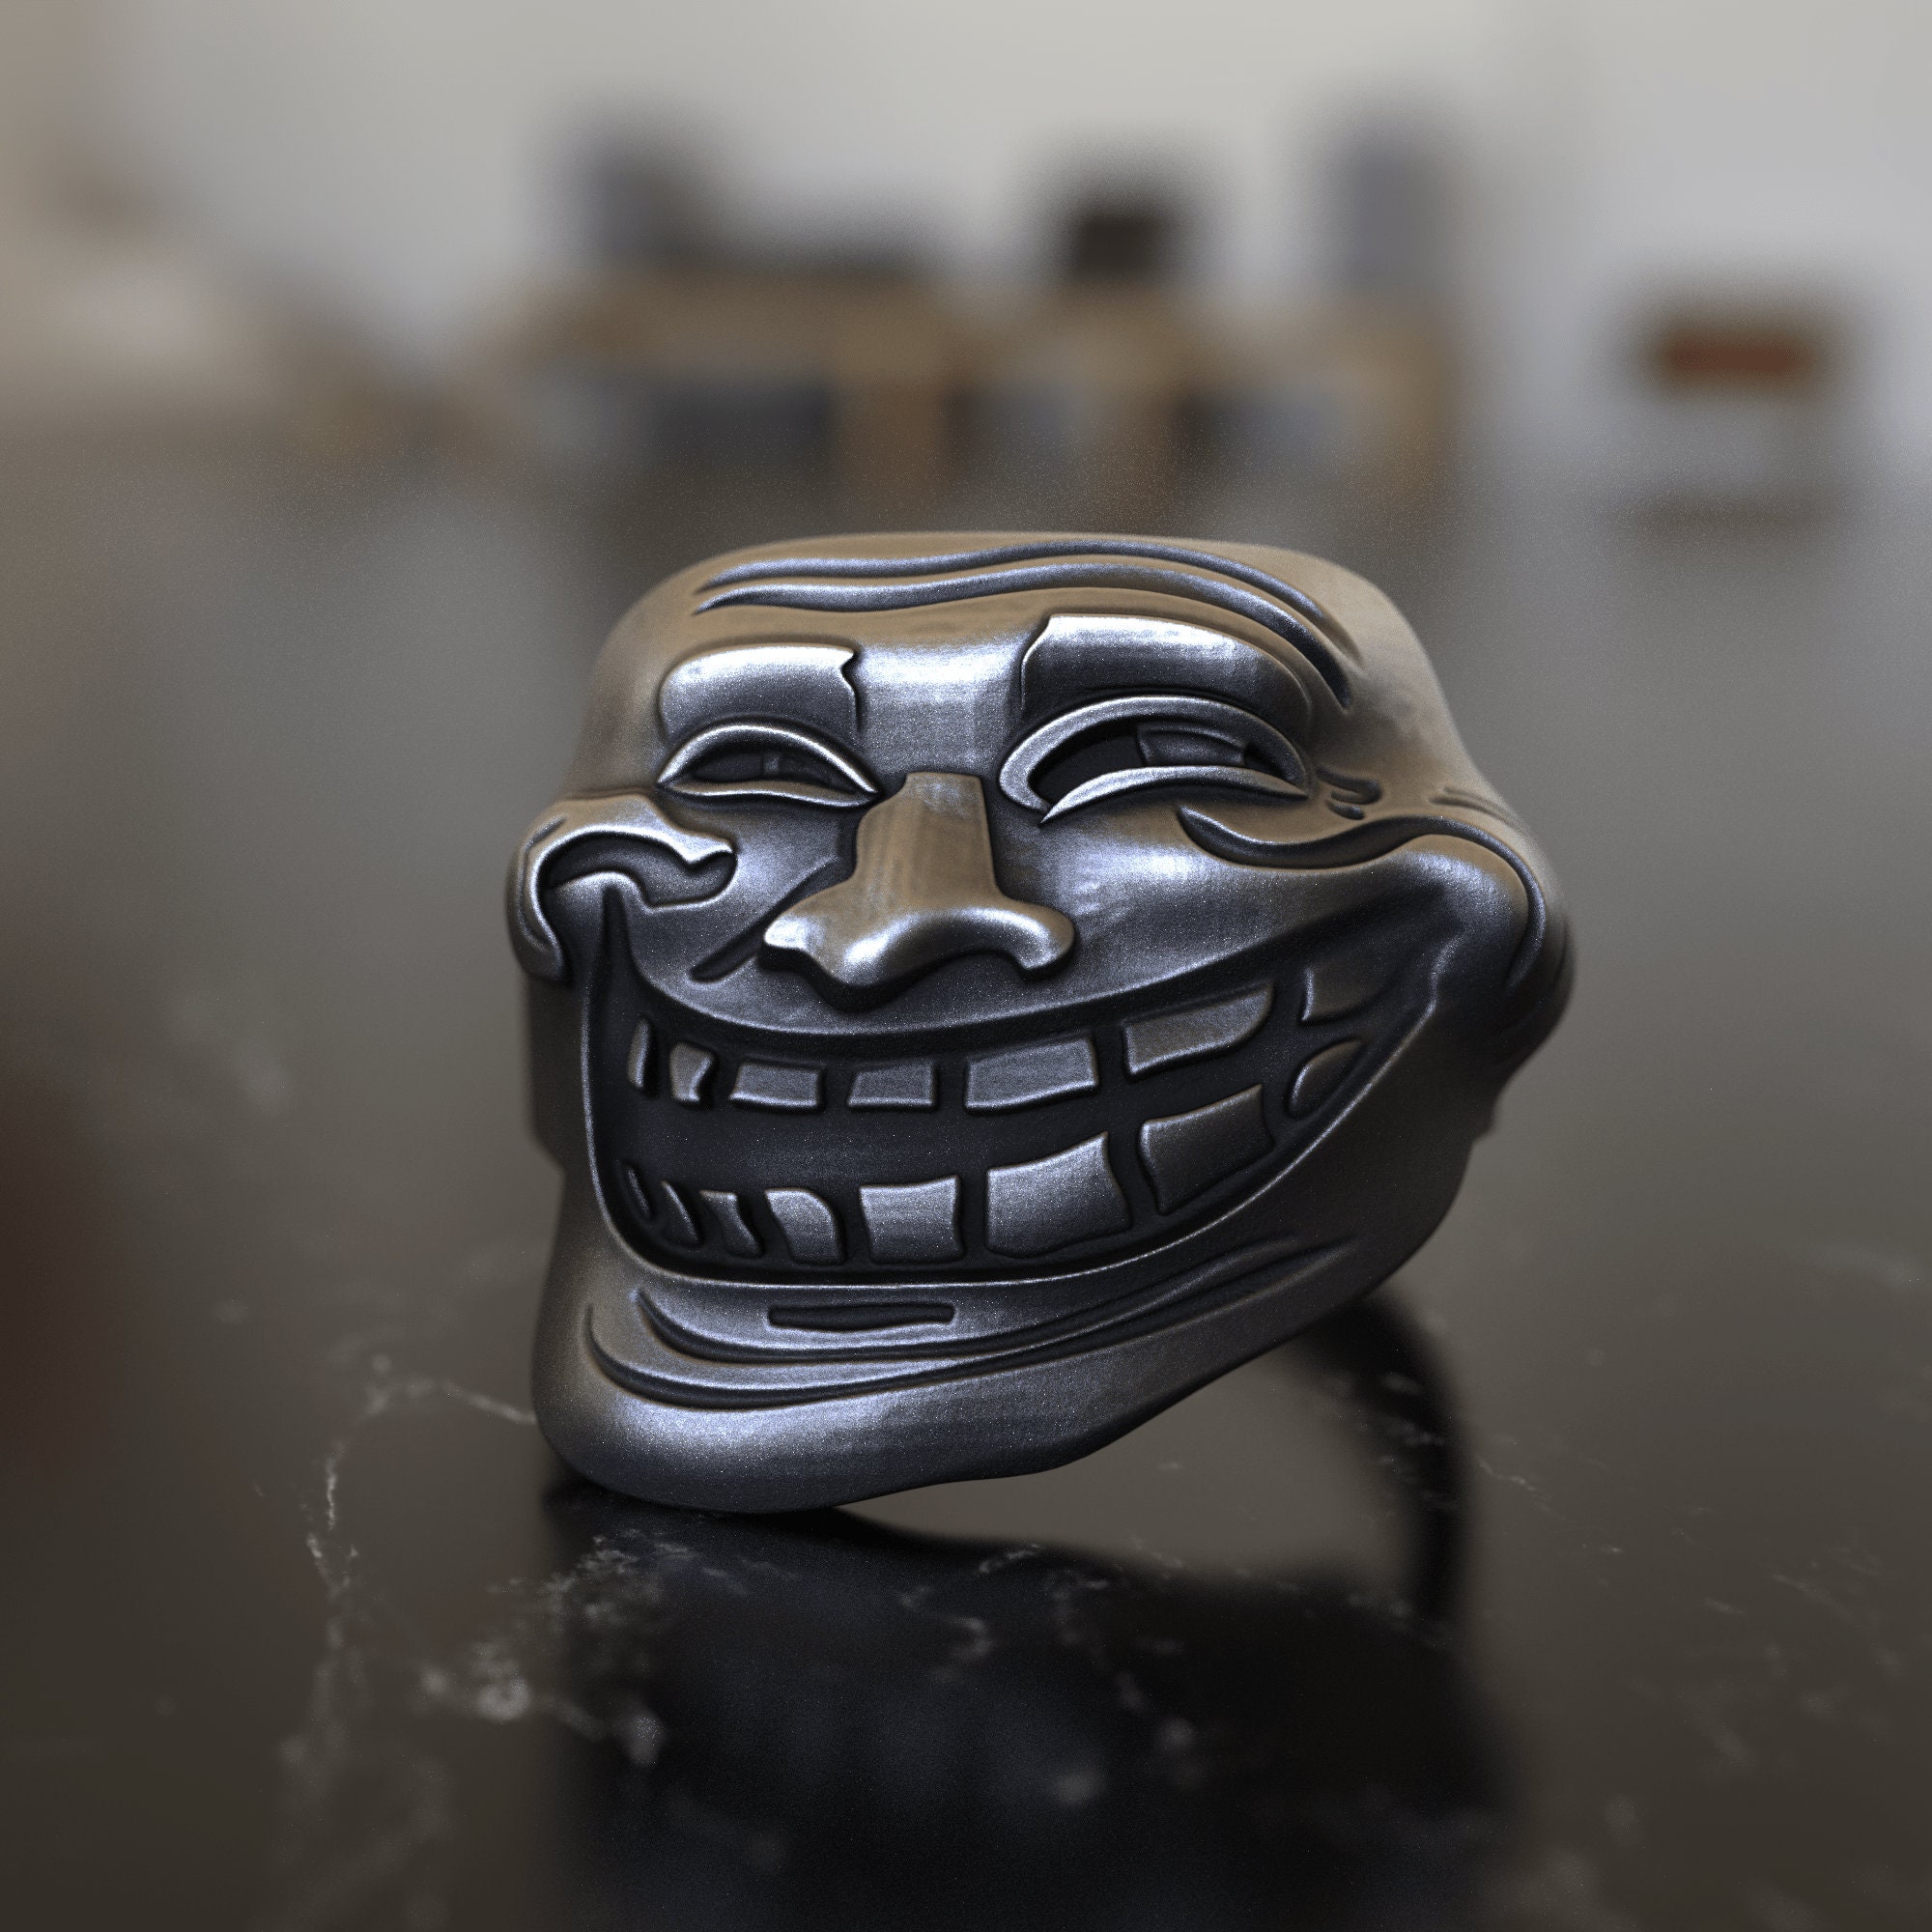 Crazy Troll Face Social Media Mask for Sale by Steelpaulo